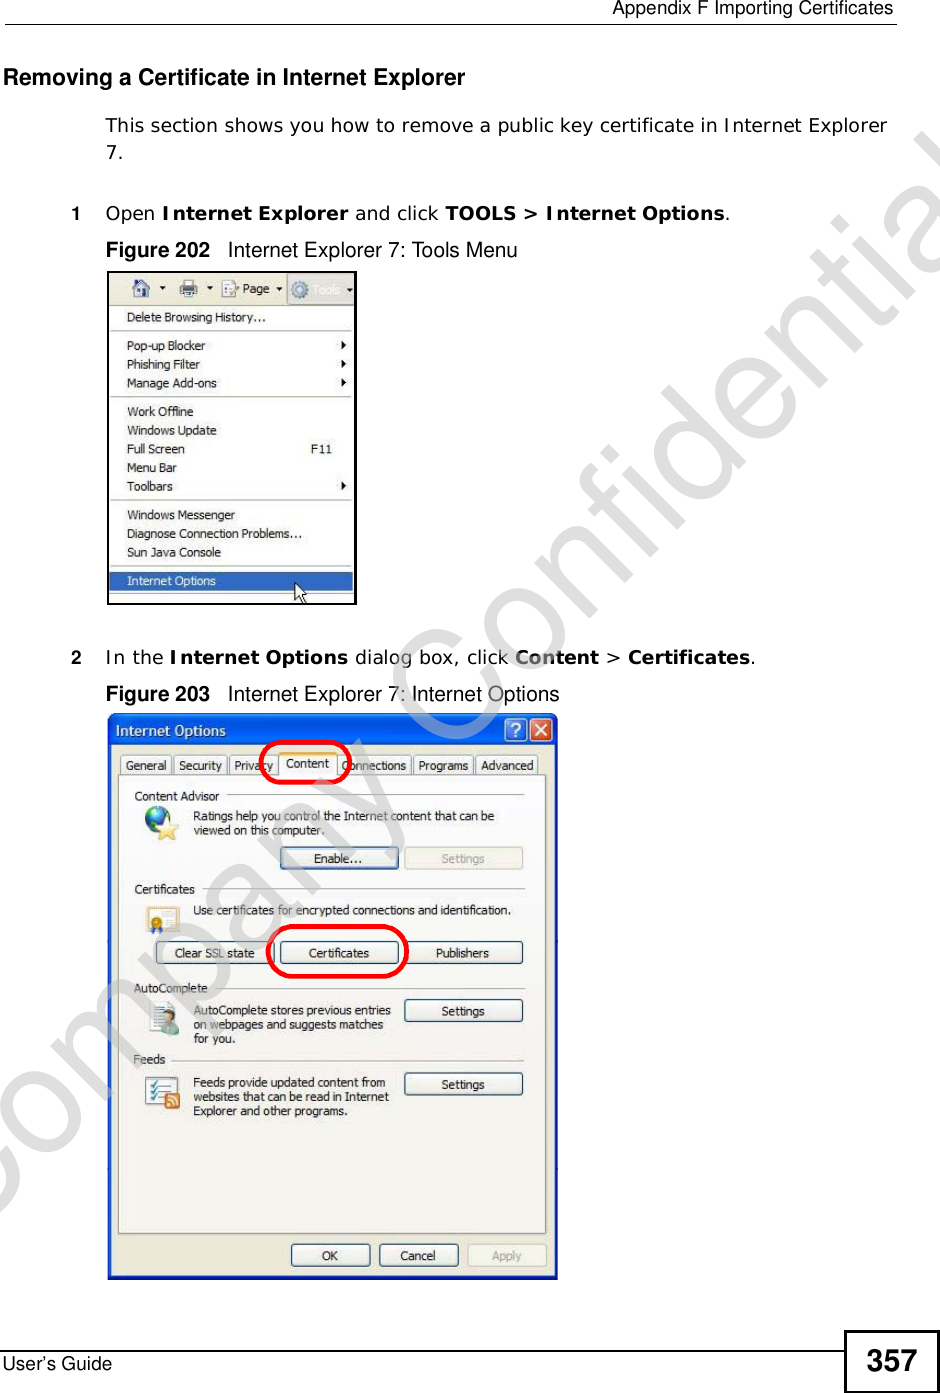  Appendix FImporting CertificatesUser’s Guide 357Removing a Certificate in Internet ExplorerThis section shows you how to remove a public key certificate in Internet Explorer 7.1Open Internet Explorer and click TOOLS &gt;Internet Options.Figure 202   Internet Explorer 7: Tools Menu2In the Internet Options dialog box, click Content &gt;Certificates.Figure 203   Internet Explorer 7: Internet OptionsCompany Confidential